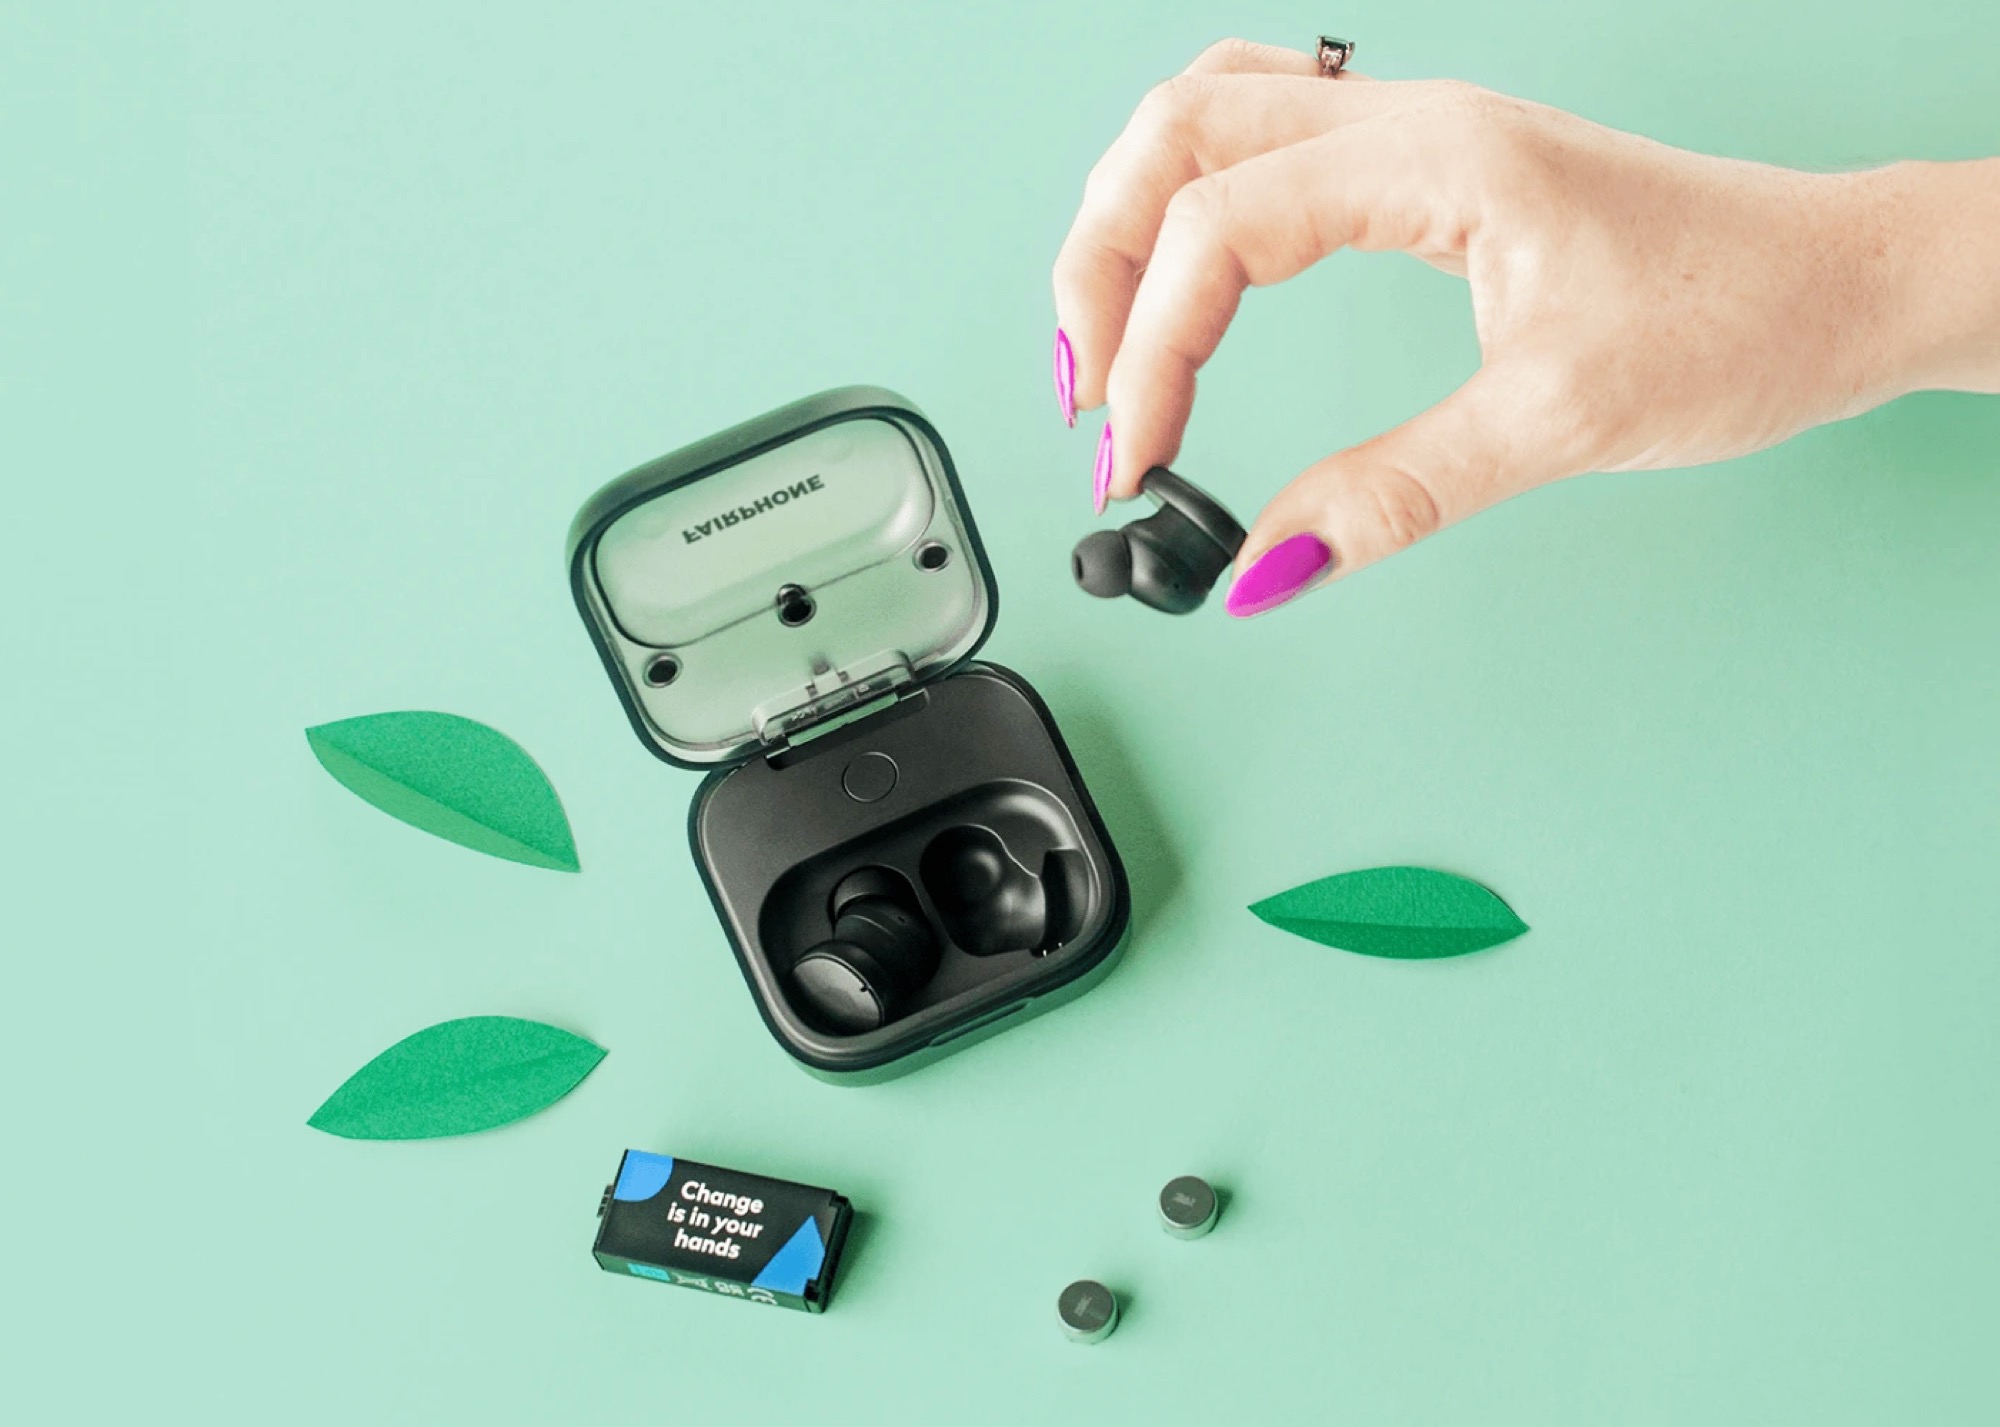 Fairphone Fairbuds: Easily Repairable TWS Earphones for a Sustainable Future